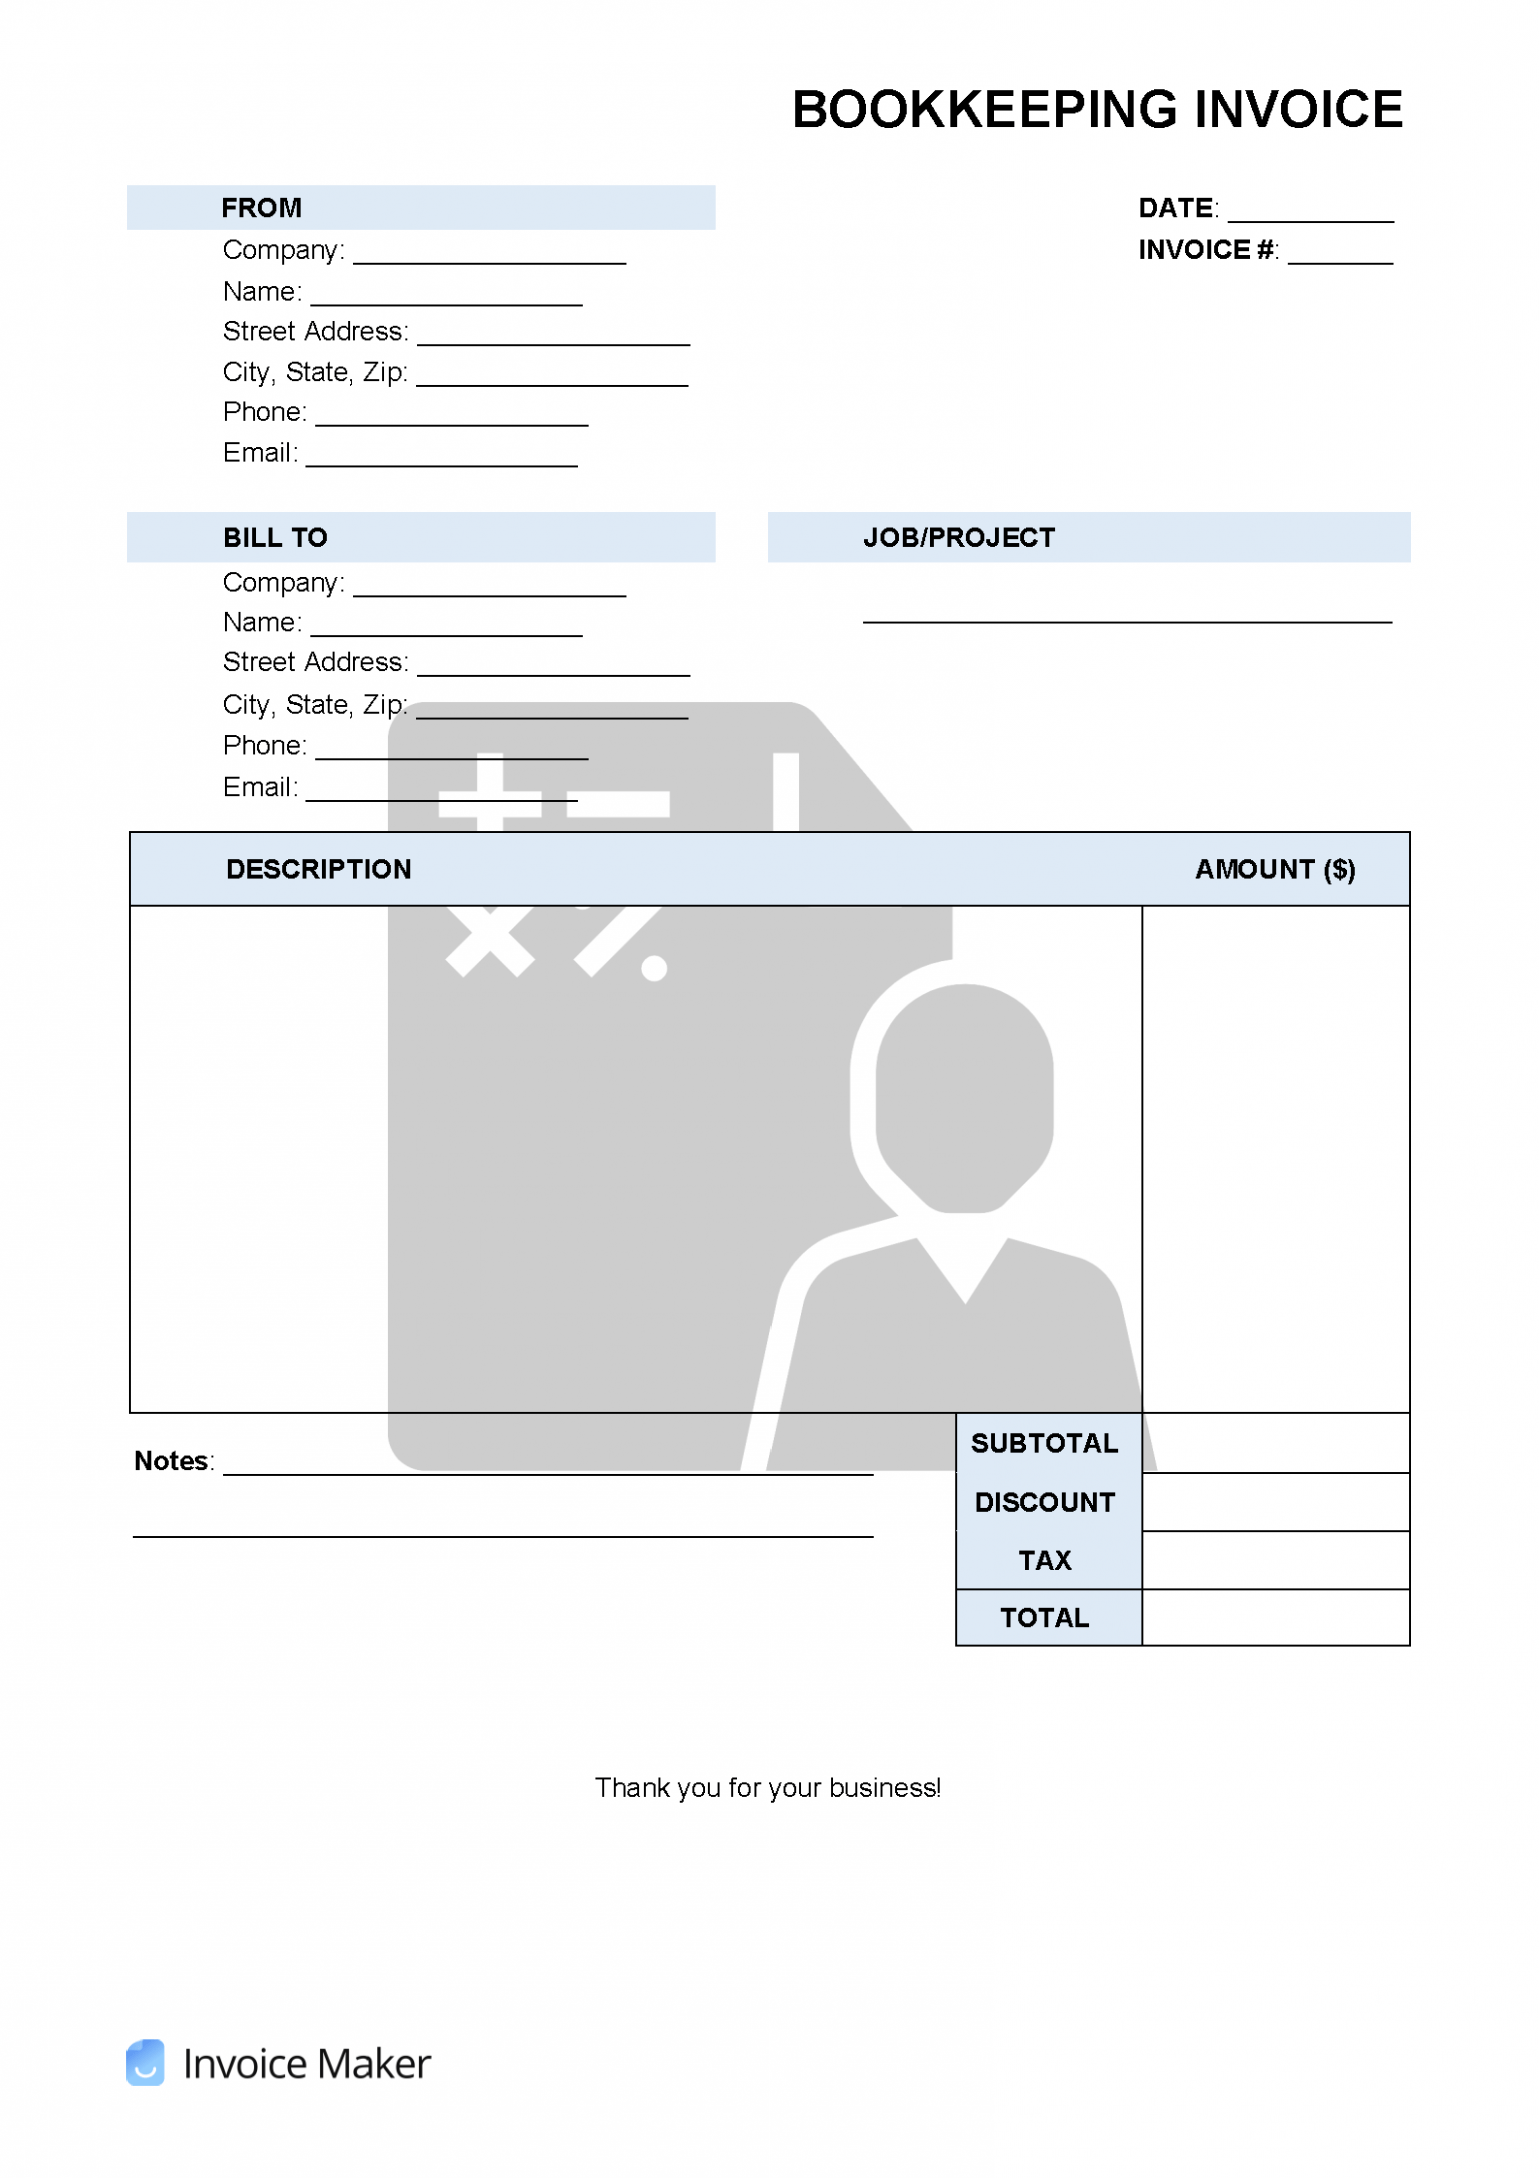 Printable Bookkeeper Invoice Template Sample